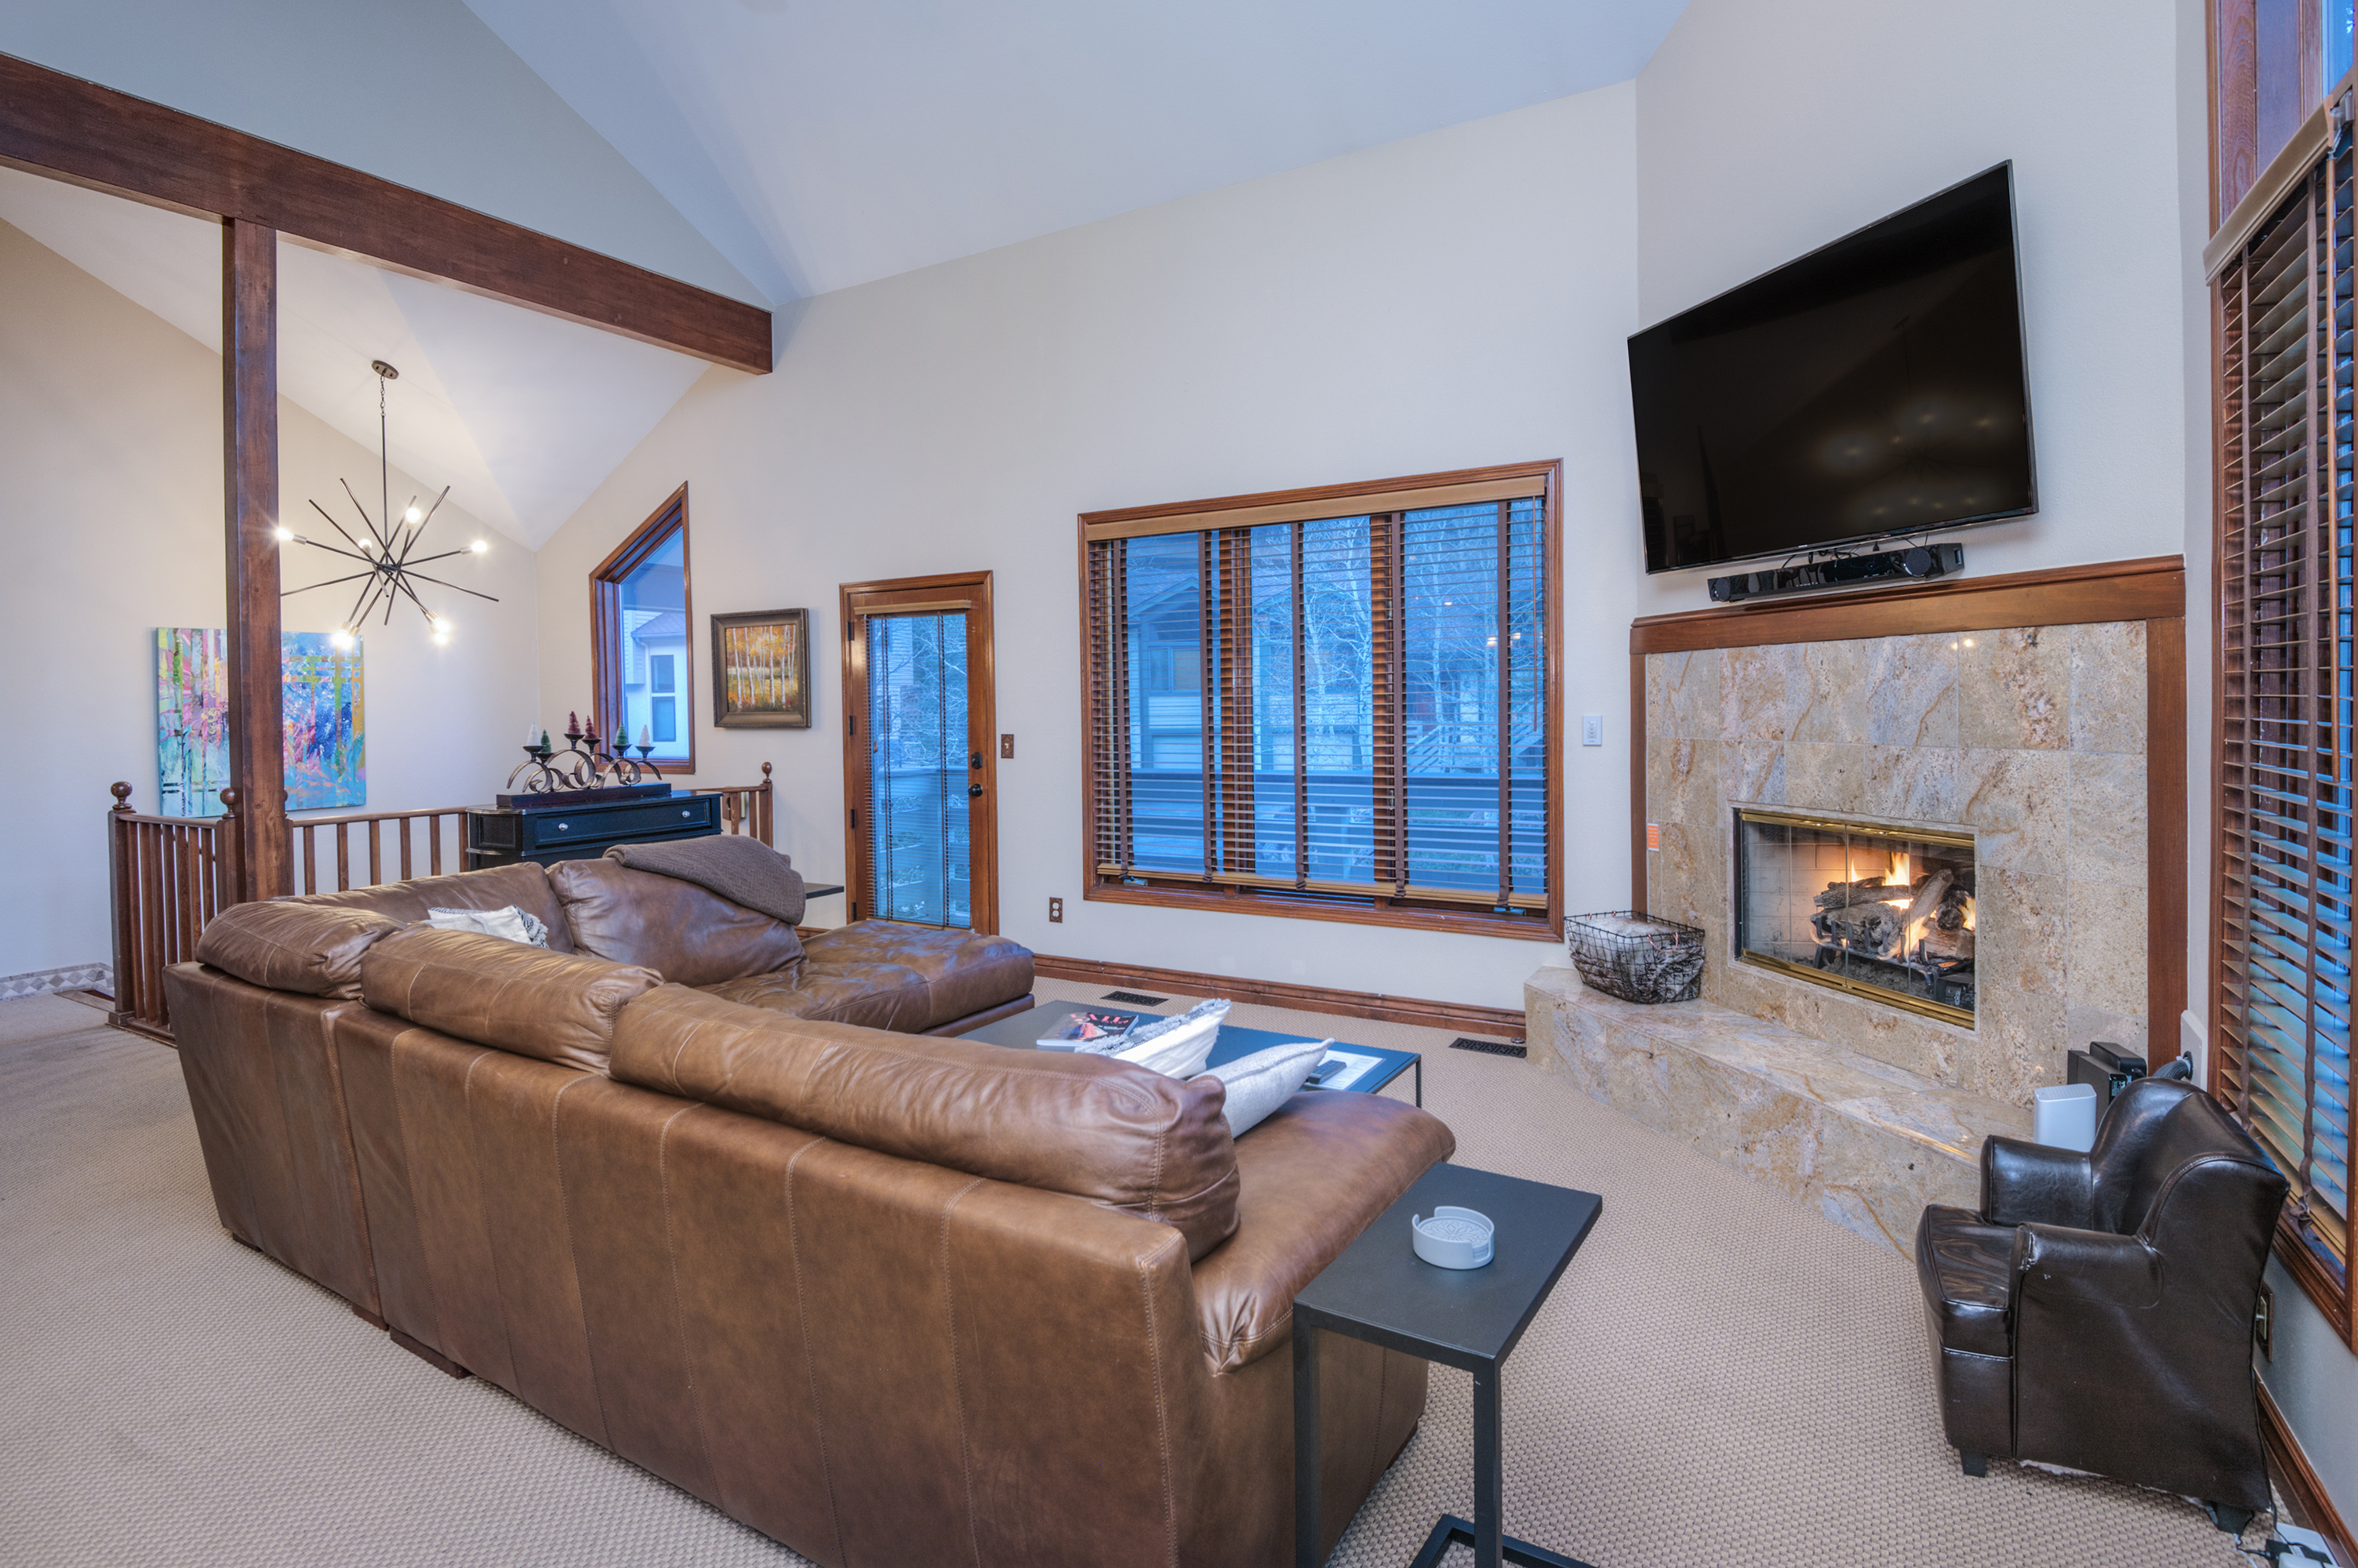 Property Image 2 - Nice 4 bedroom home in East Vail, with private hot tub.